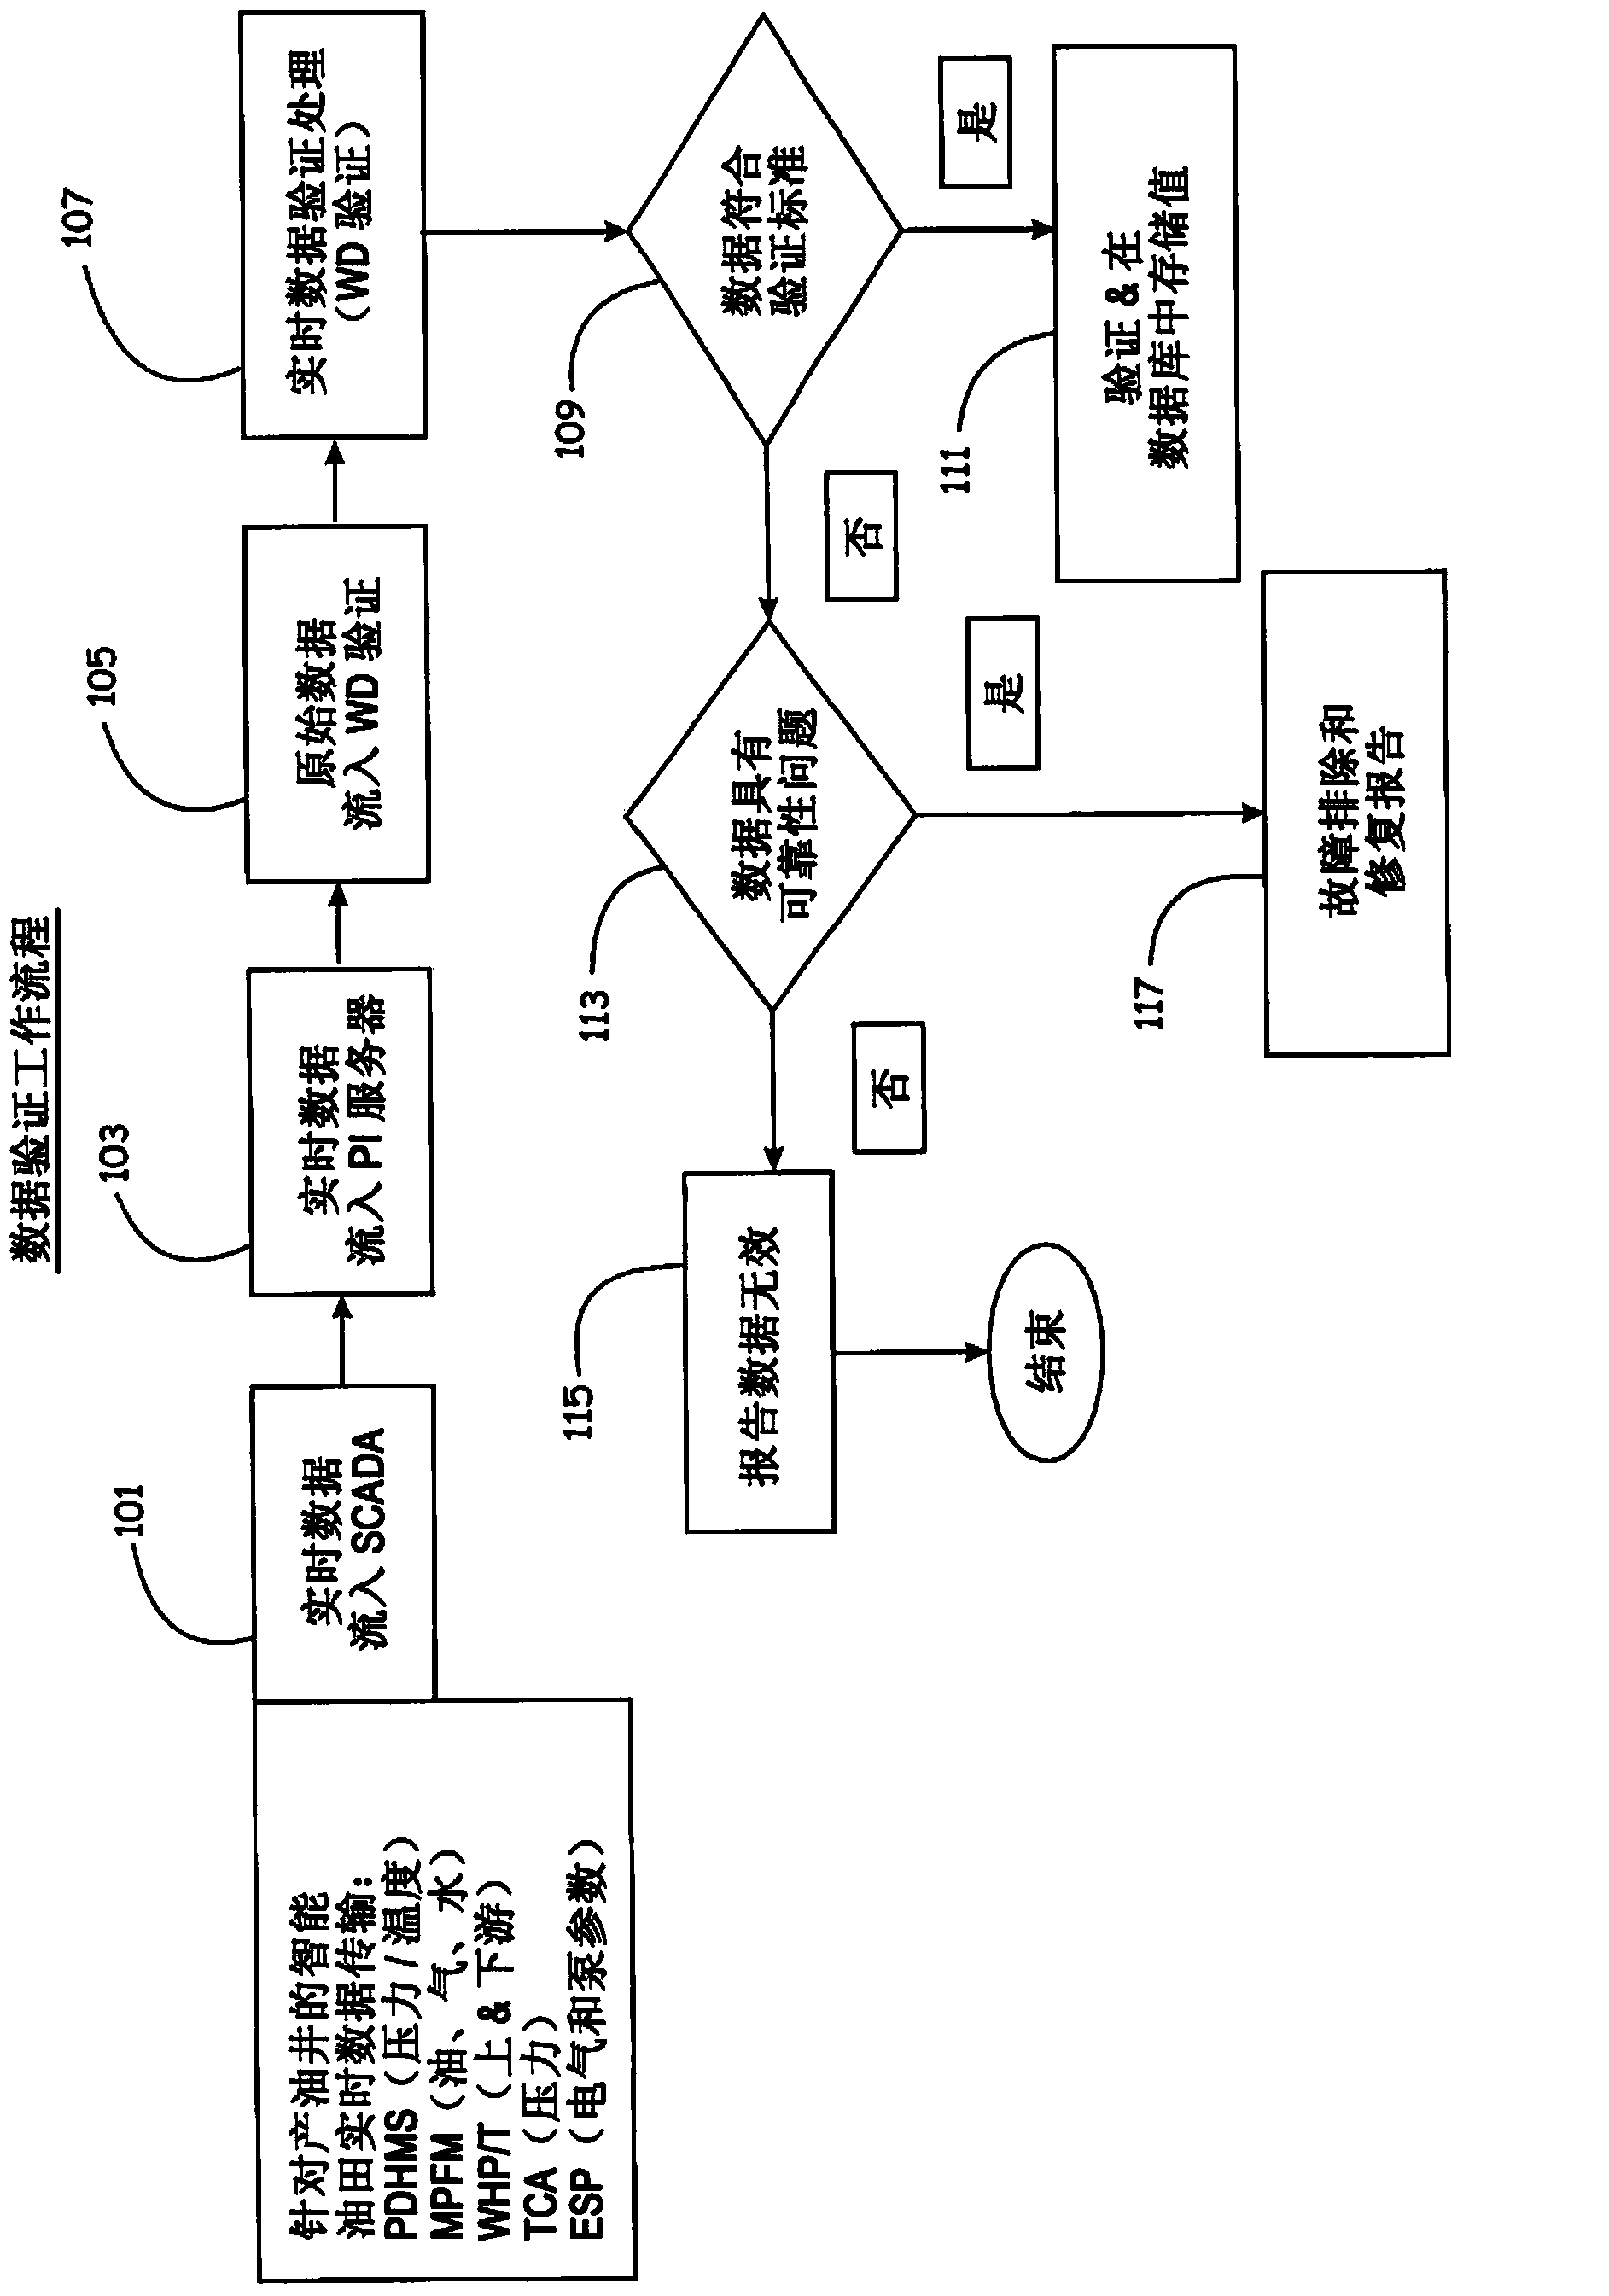 Real-time dynamic data validation apparatus, system, program code, computer readable medium, and methods for intelligent fields